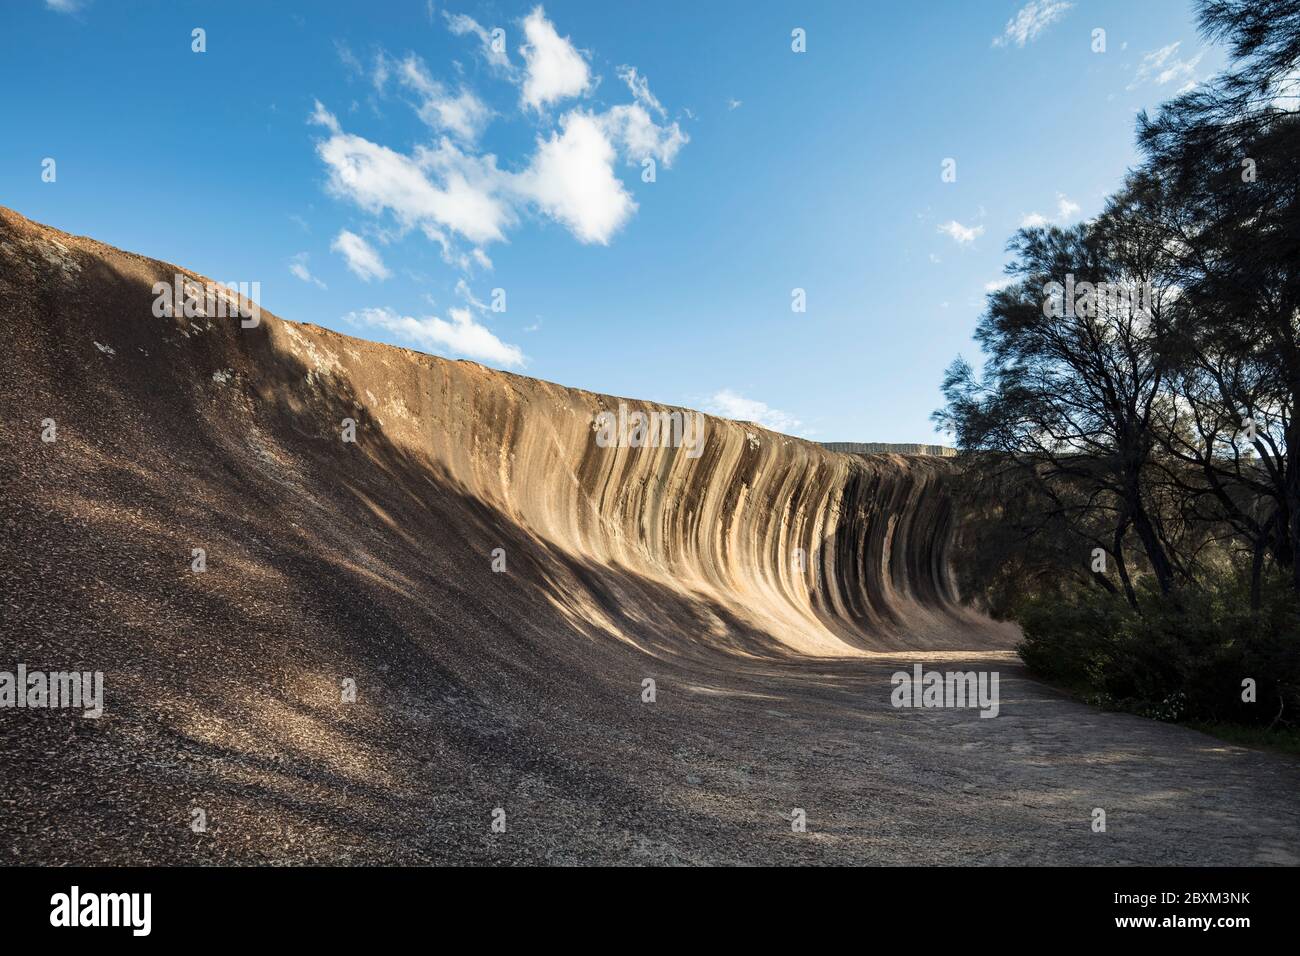 Wave Rock, a 15 metre high natural rock formation that is shaped like a tall breaking ocean wave and is located at Hyden in Western Australia Stock Photo